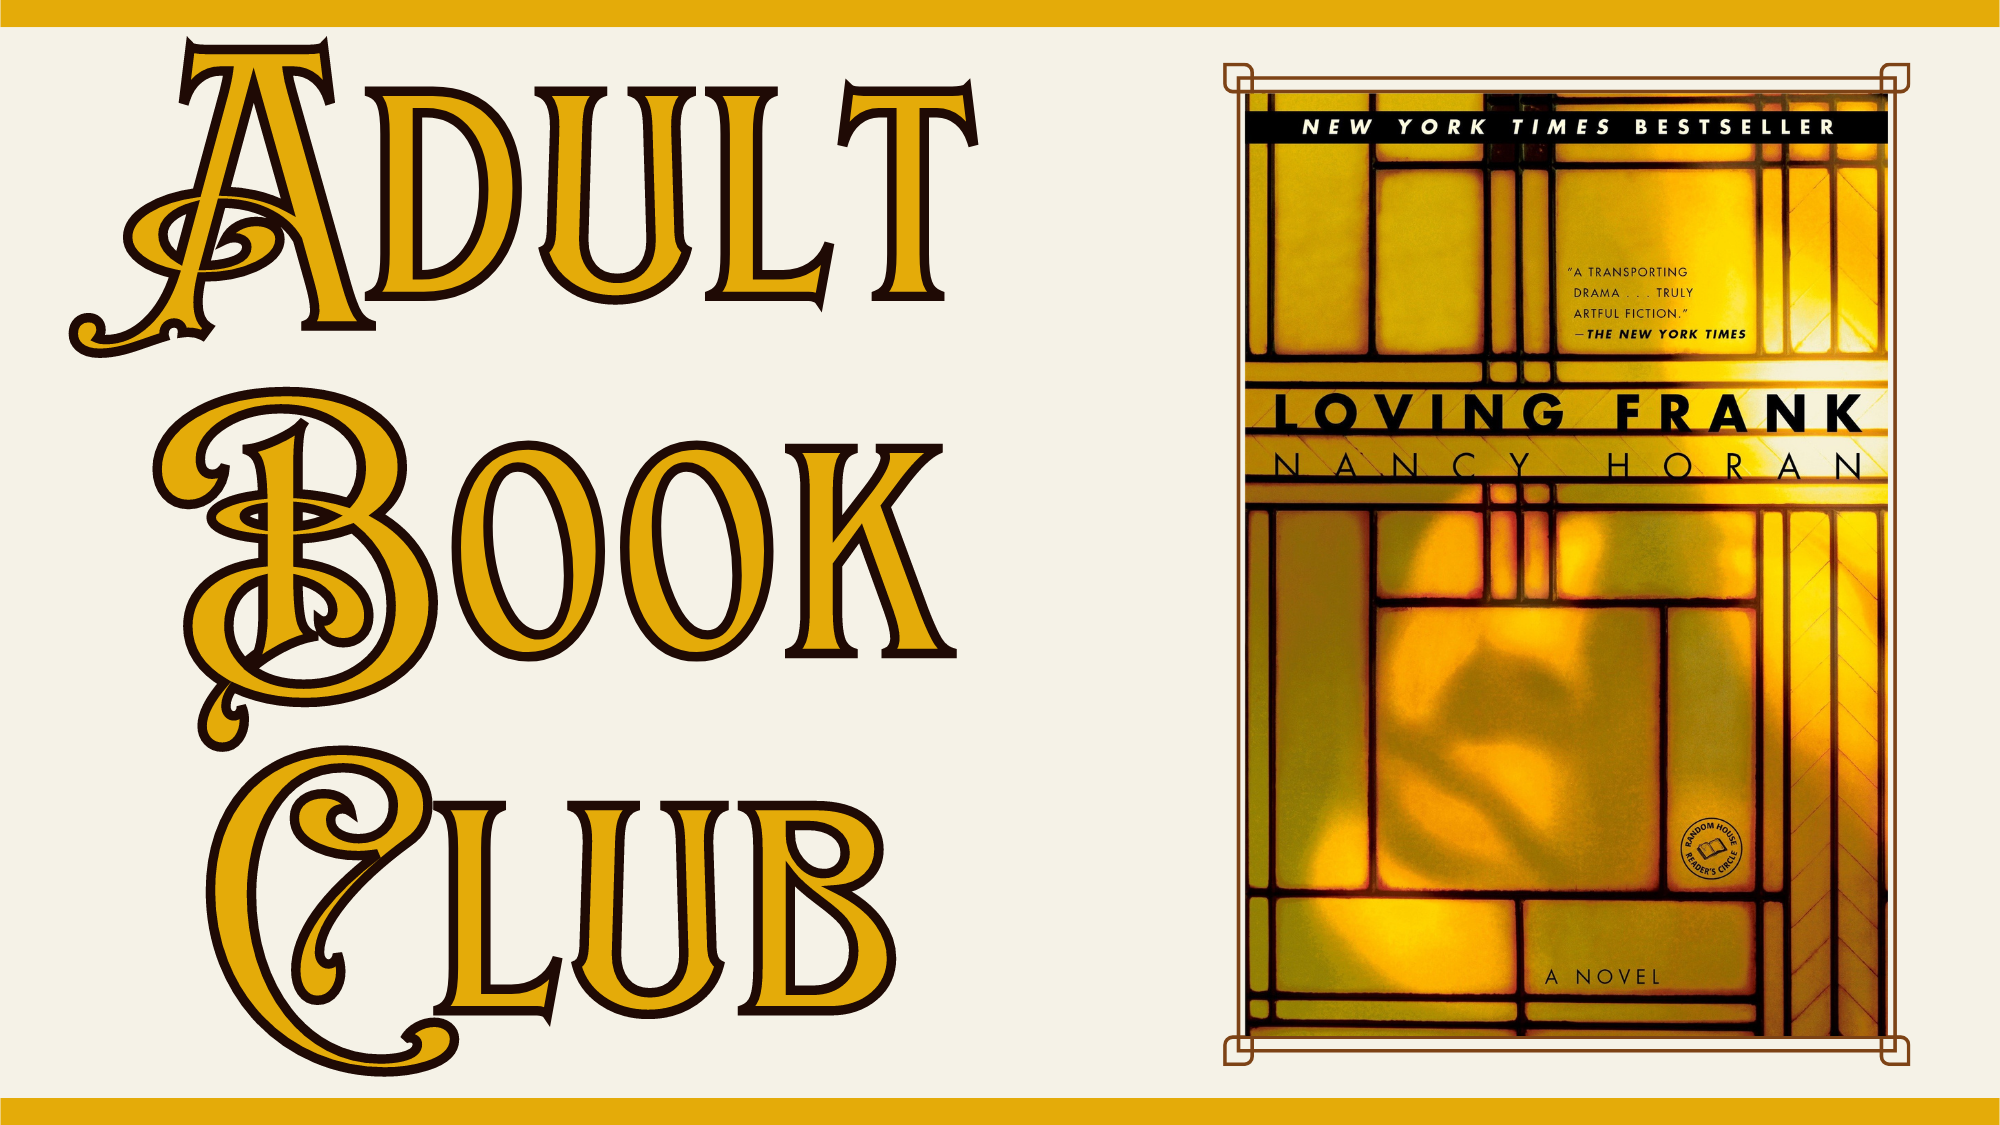 Adult Book Club. Includes cover of Loving Frank by Nancy Horan which is golden and geometric with dark vertical and horizontal lines. In the gold background it looks as if there is a reflection of a face.